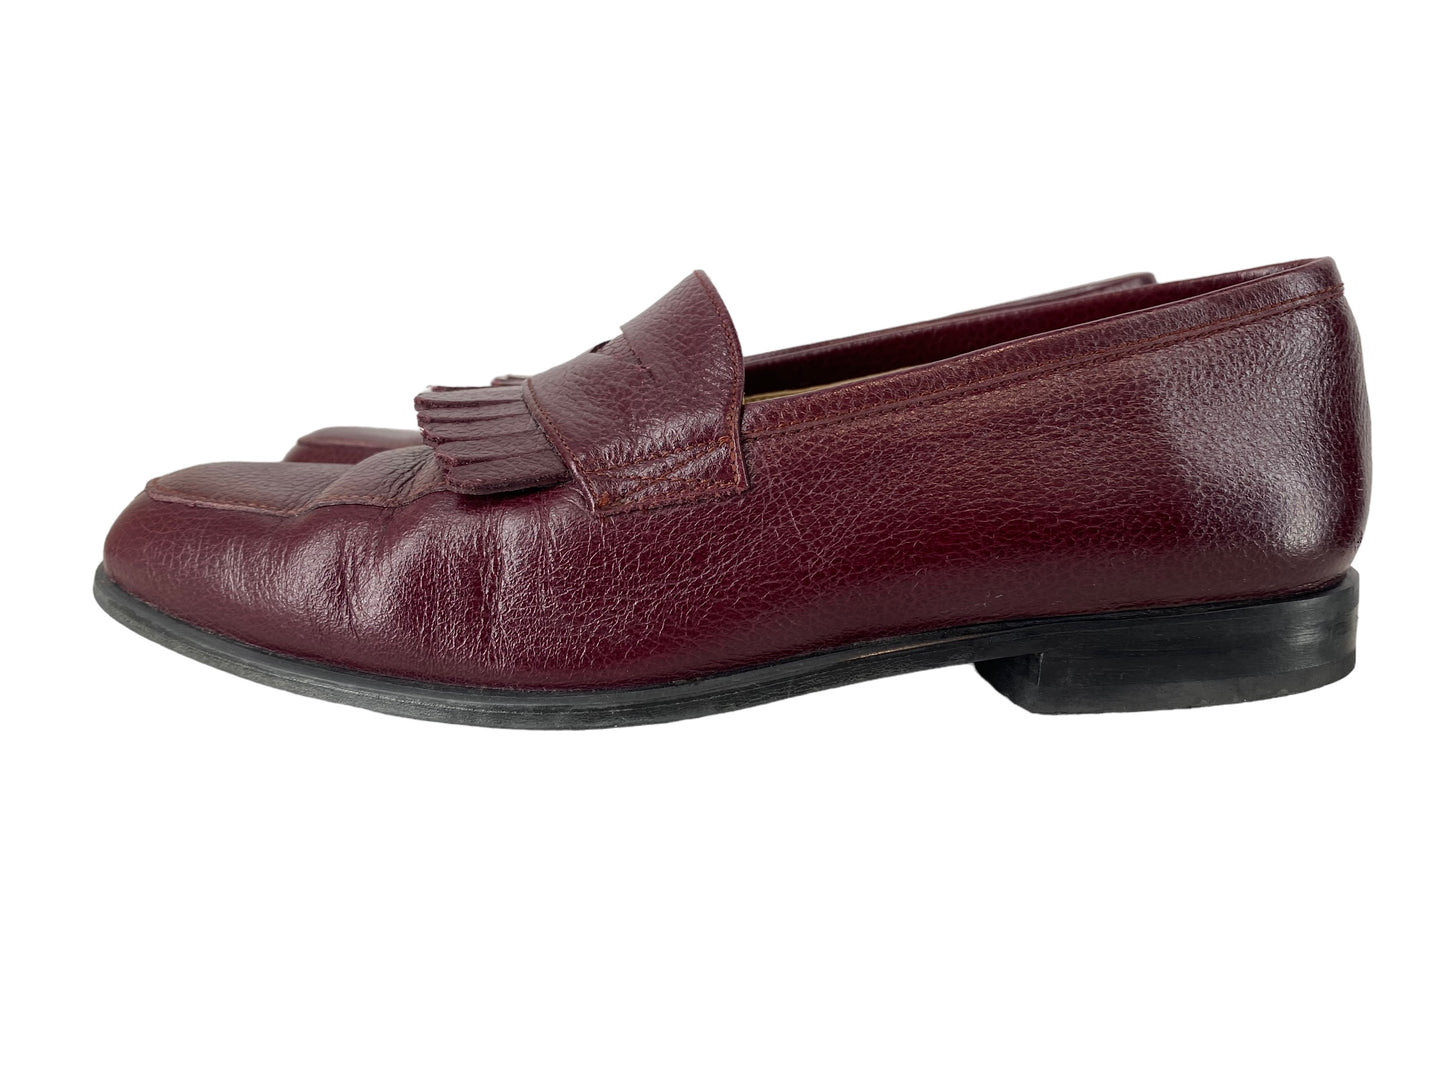 Shoes Flats Loafer Oxford By Clothes Mentor  Size: 7.5